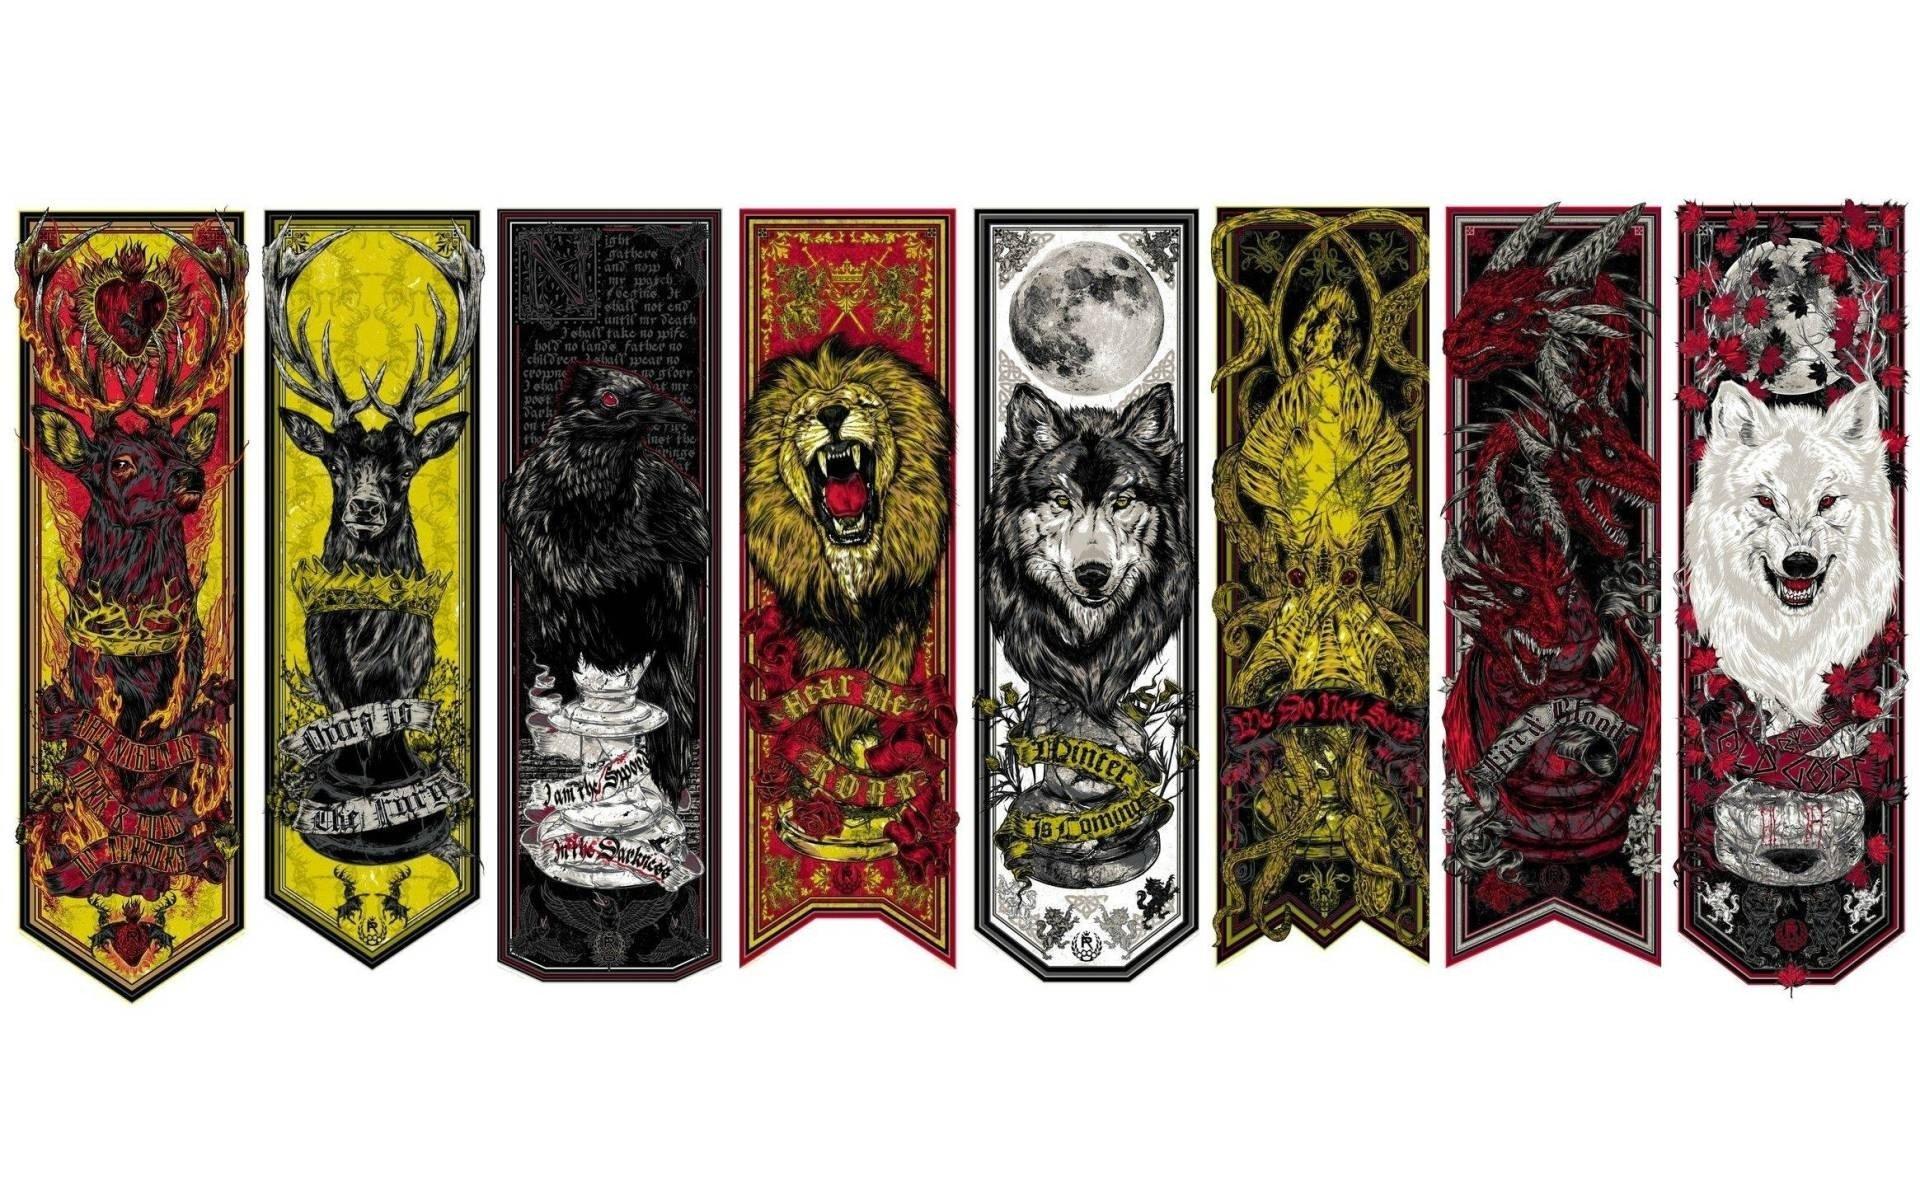 Game of Thrones House Banners [1920x1200]